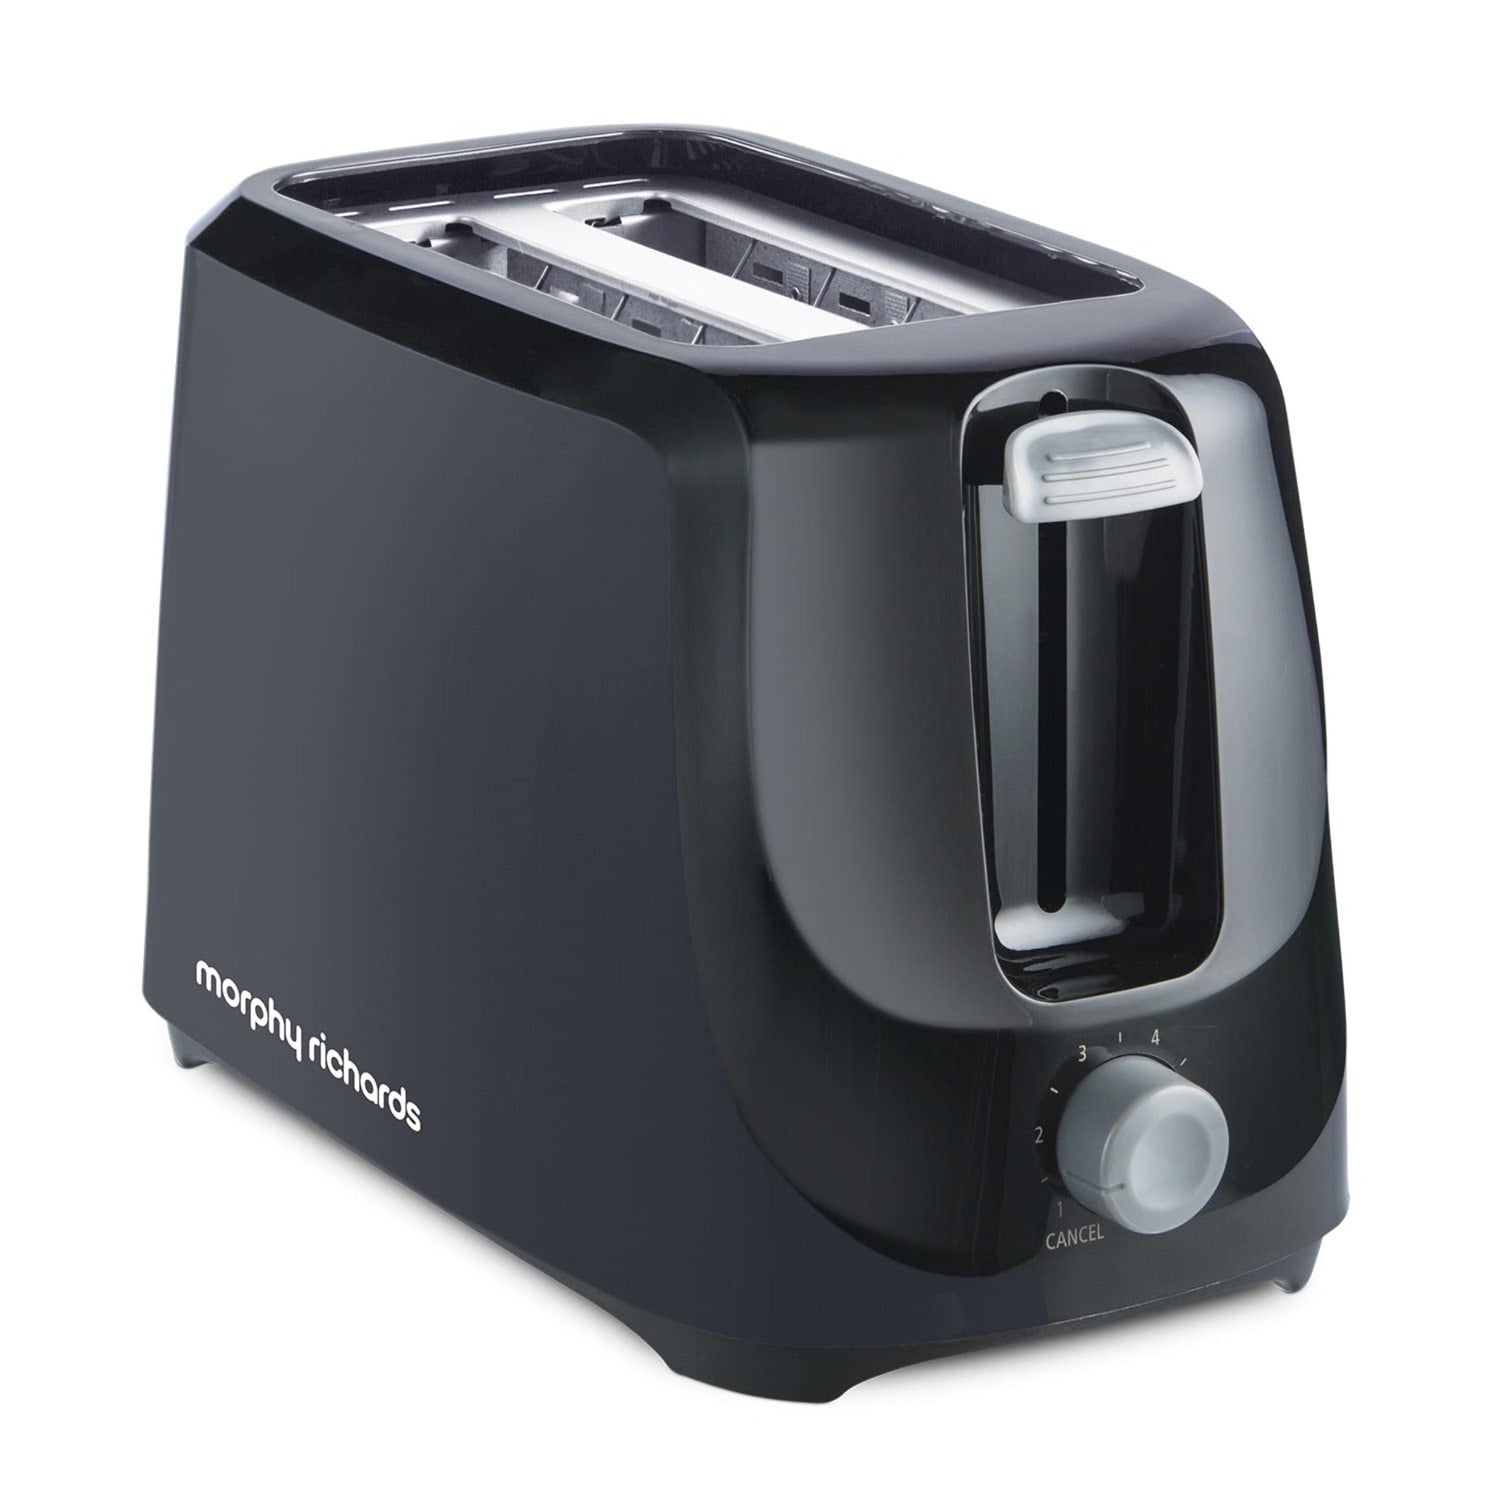 Morphy Richards Hive Series 2 Slice Pop up Toaster